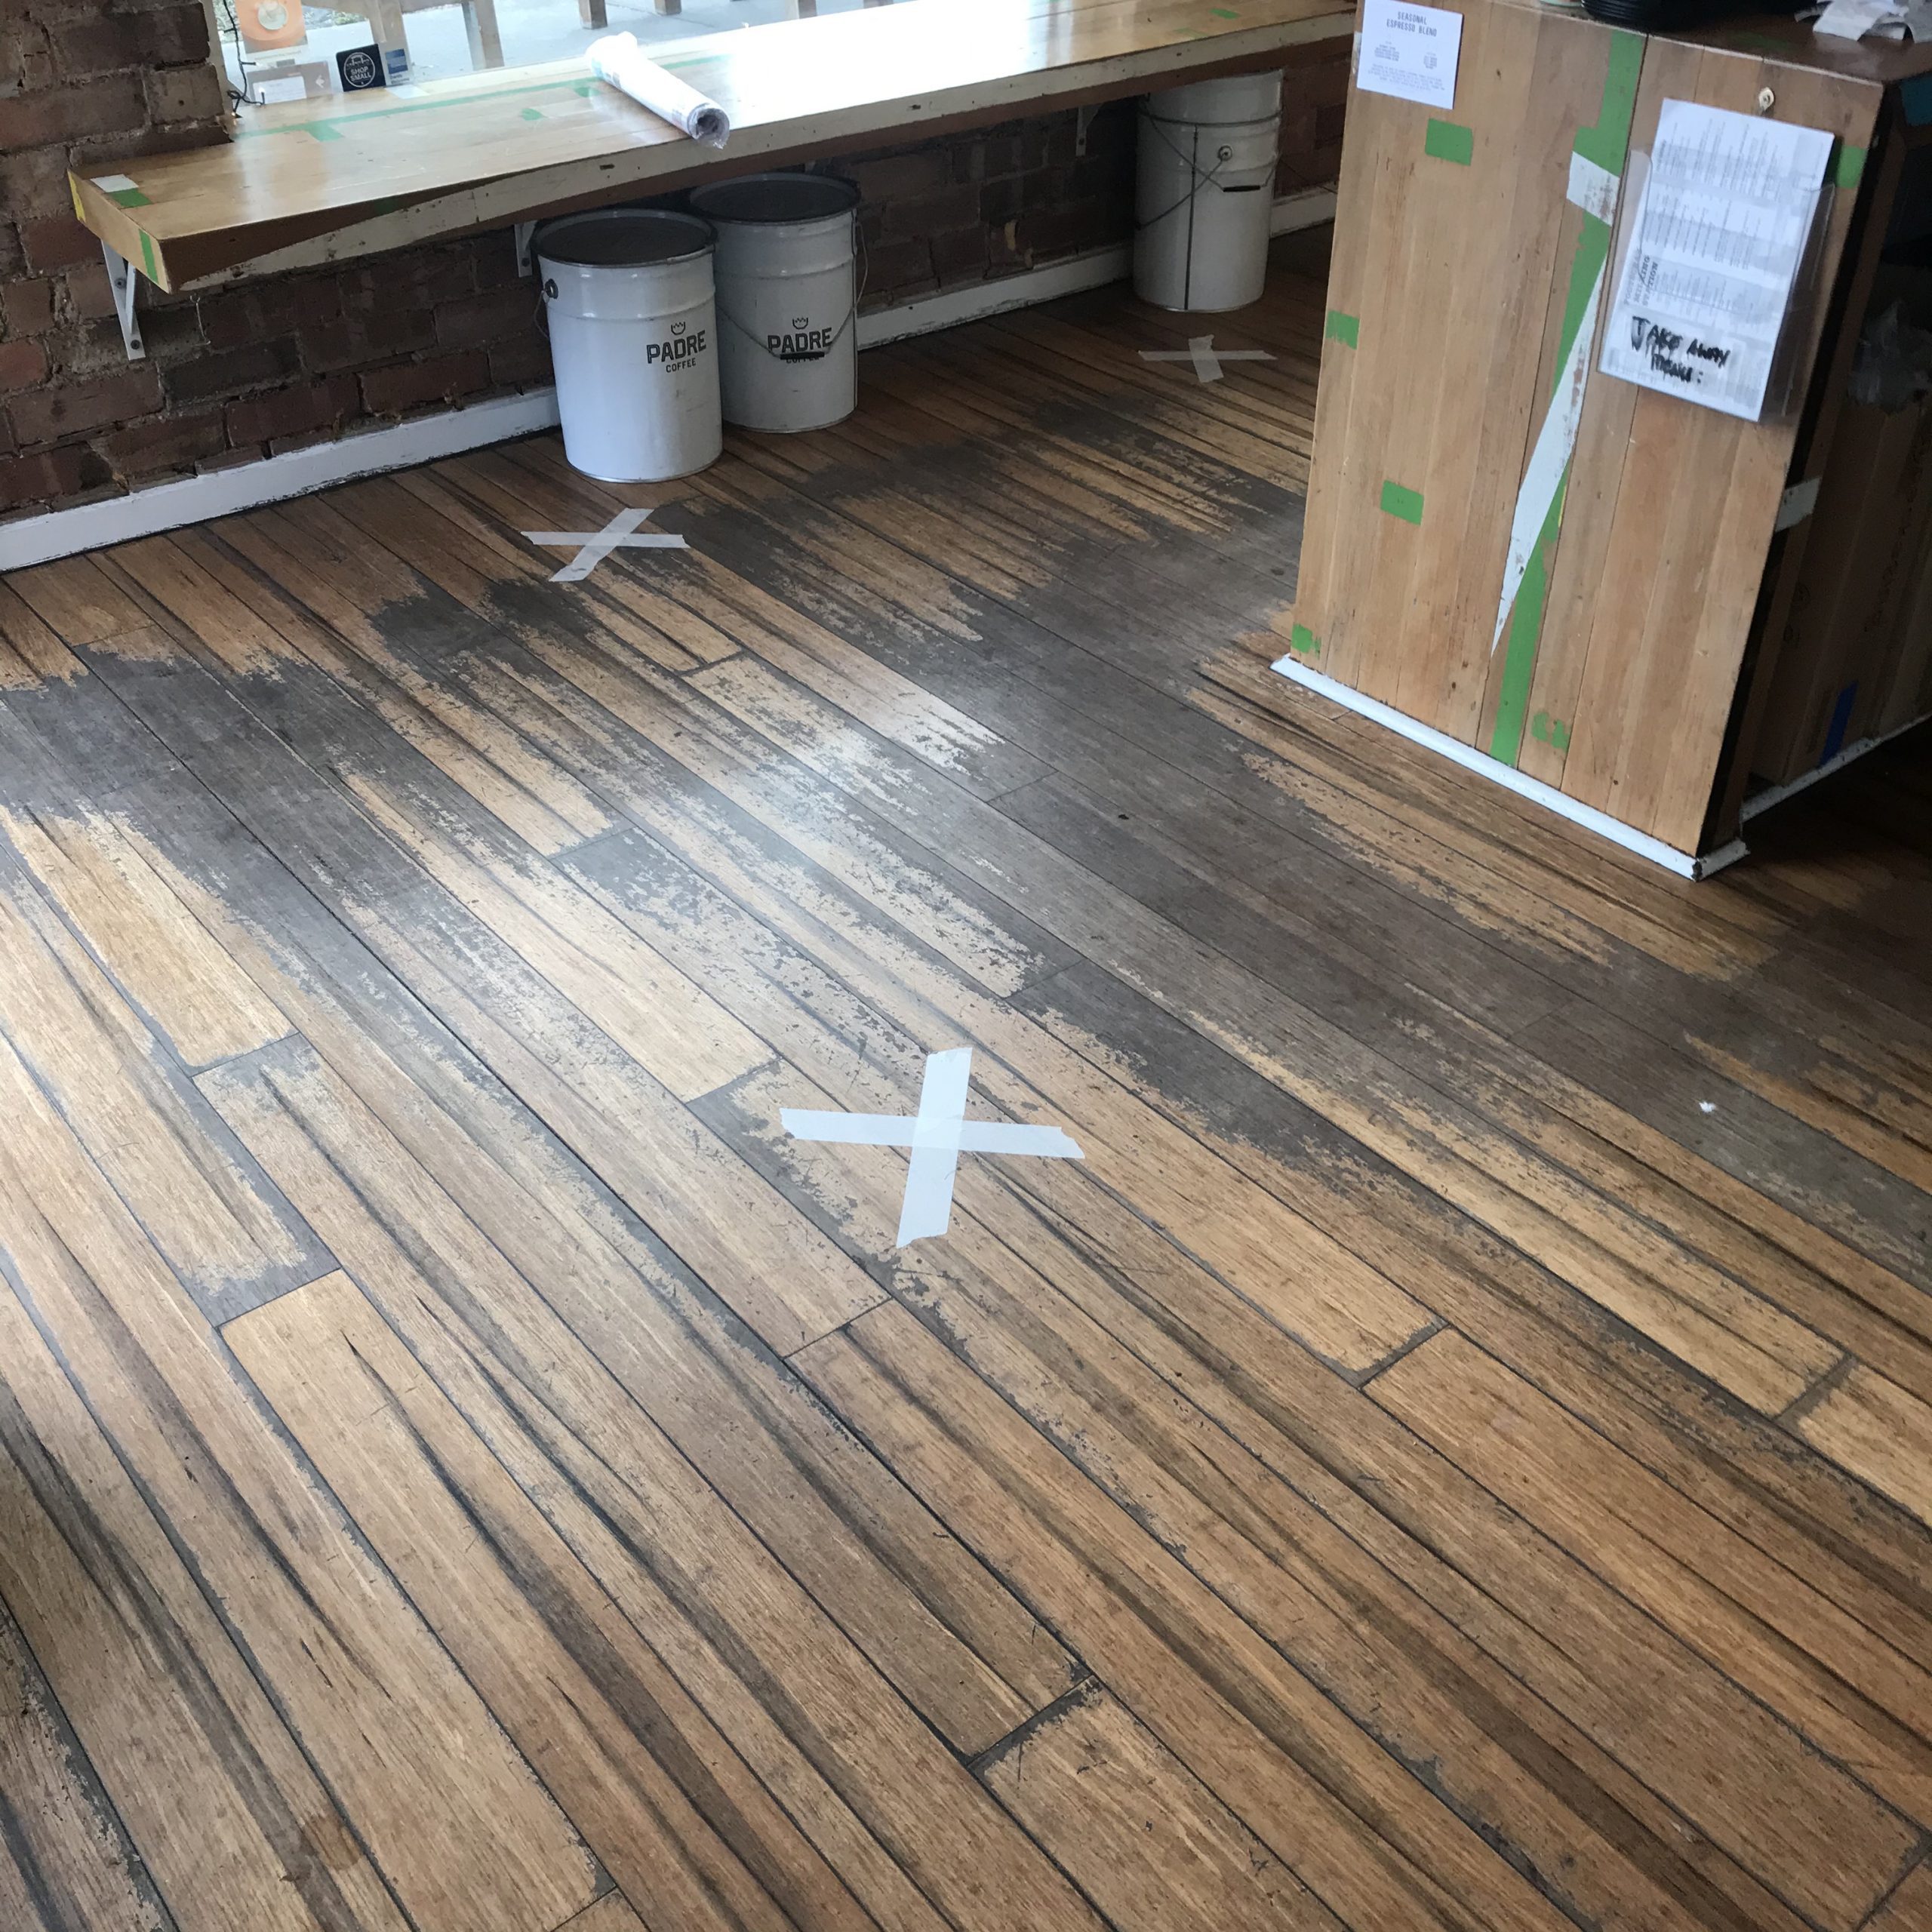 Floor with white crosses indicating where people should stand to maintain social distancing.